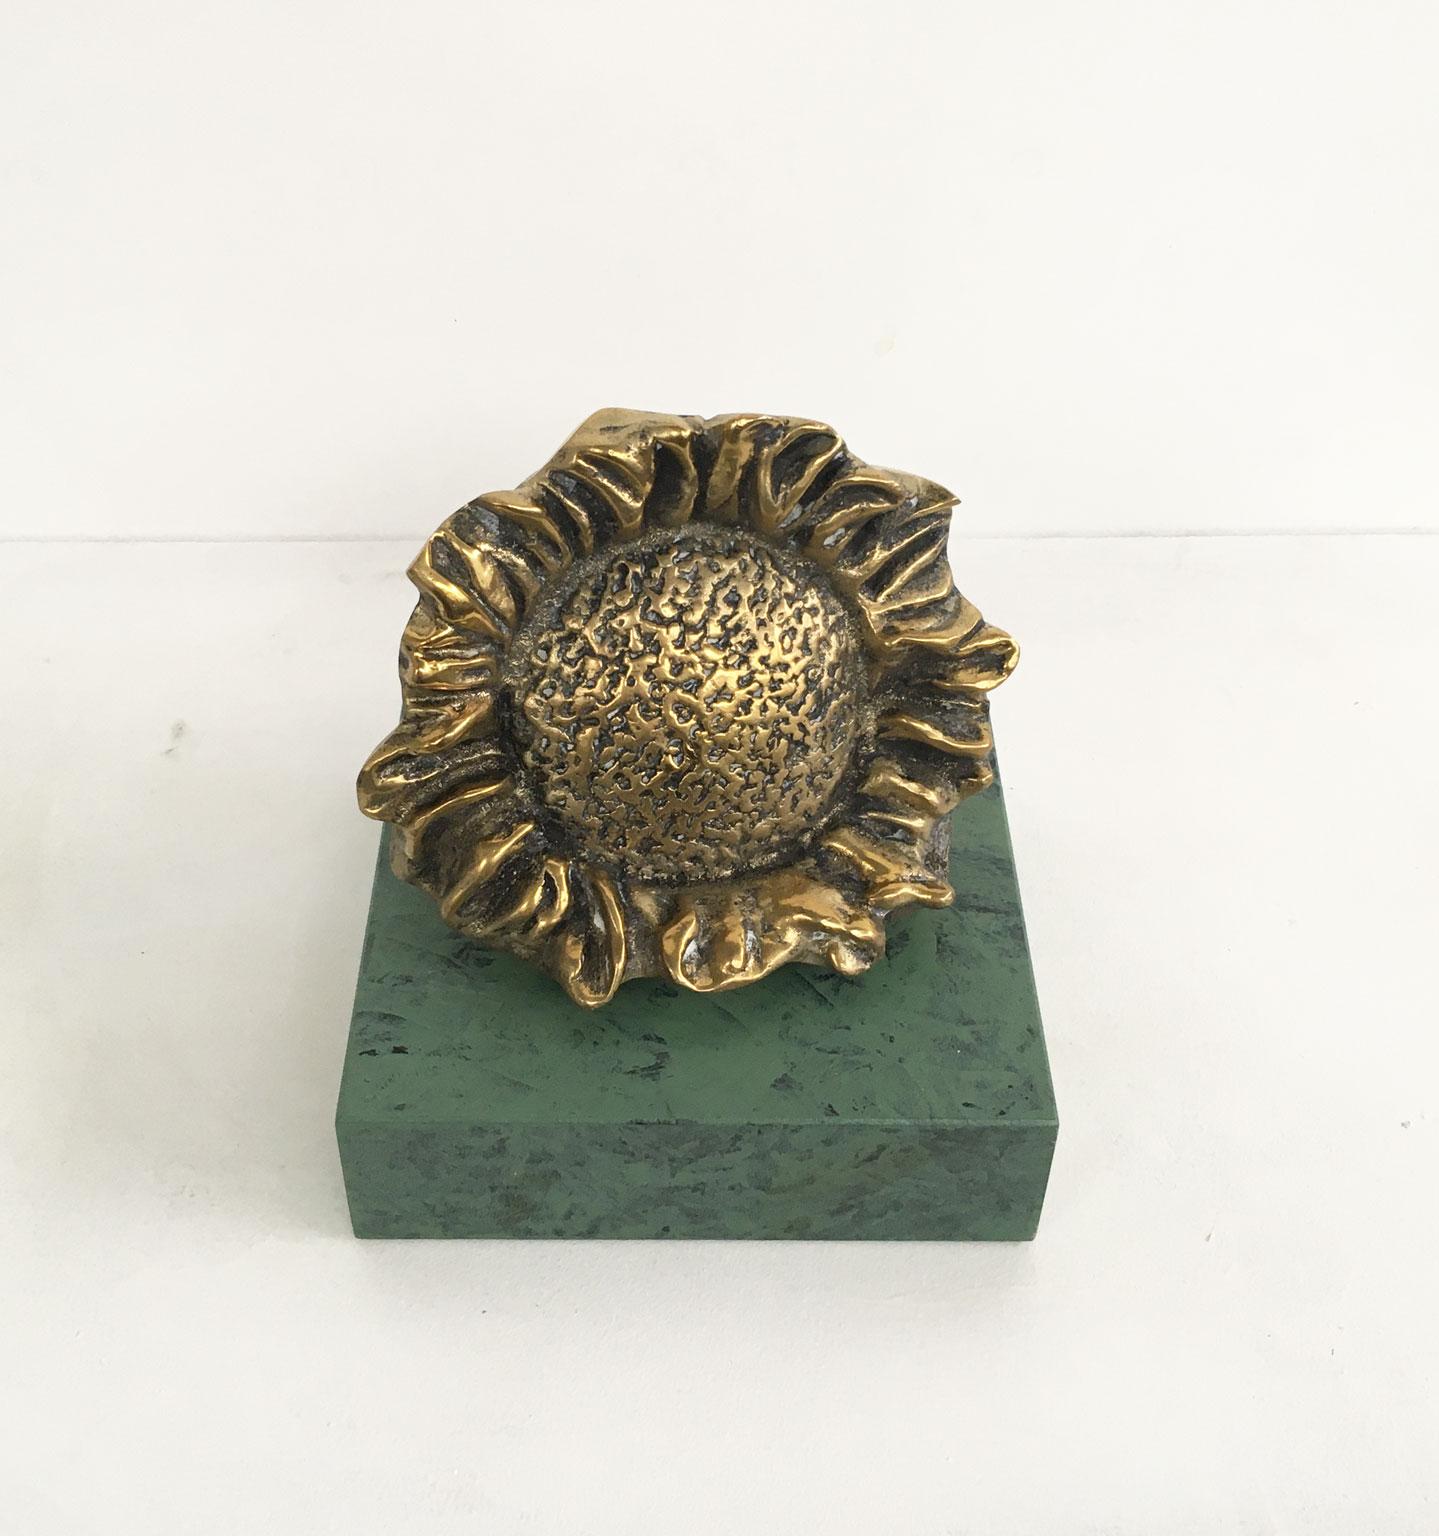 This is an engaging bronze sculpture created by the Italian artist Patrizia Guerresi, in 1986. The piece is a multiple of 1000 specimens on a green-painted wooden base. The title is 